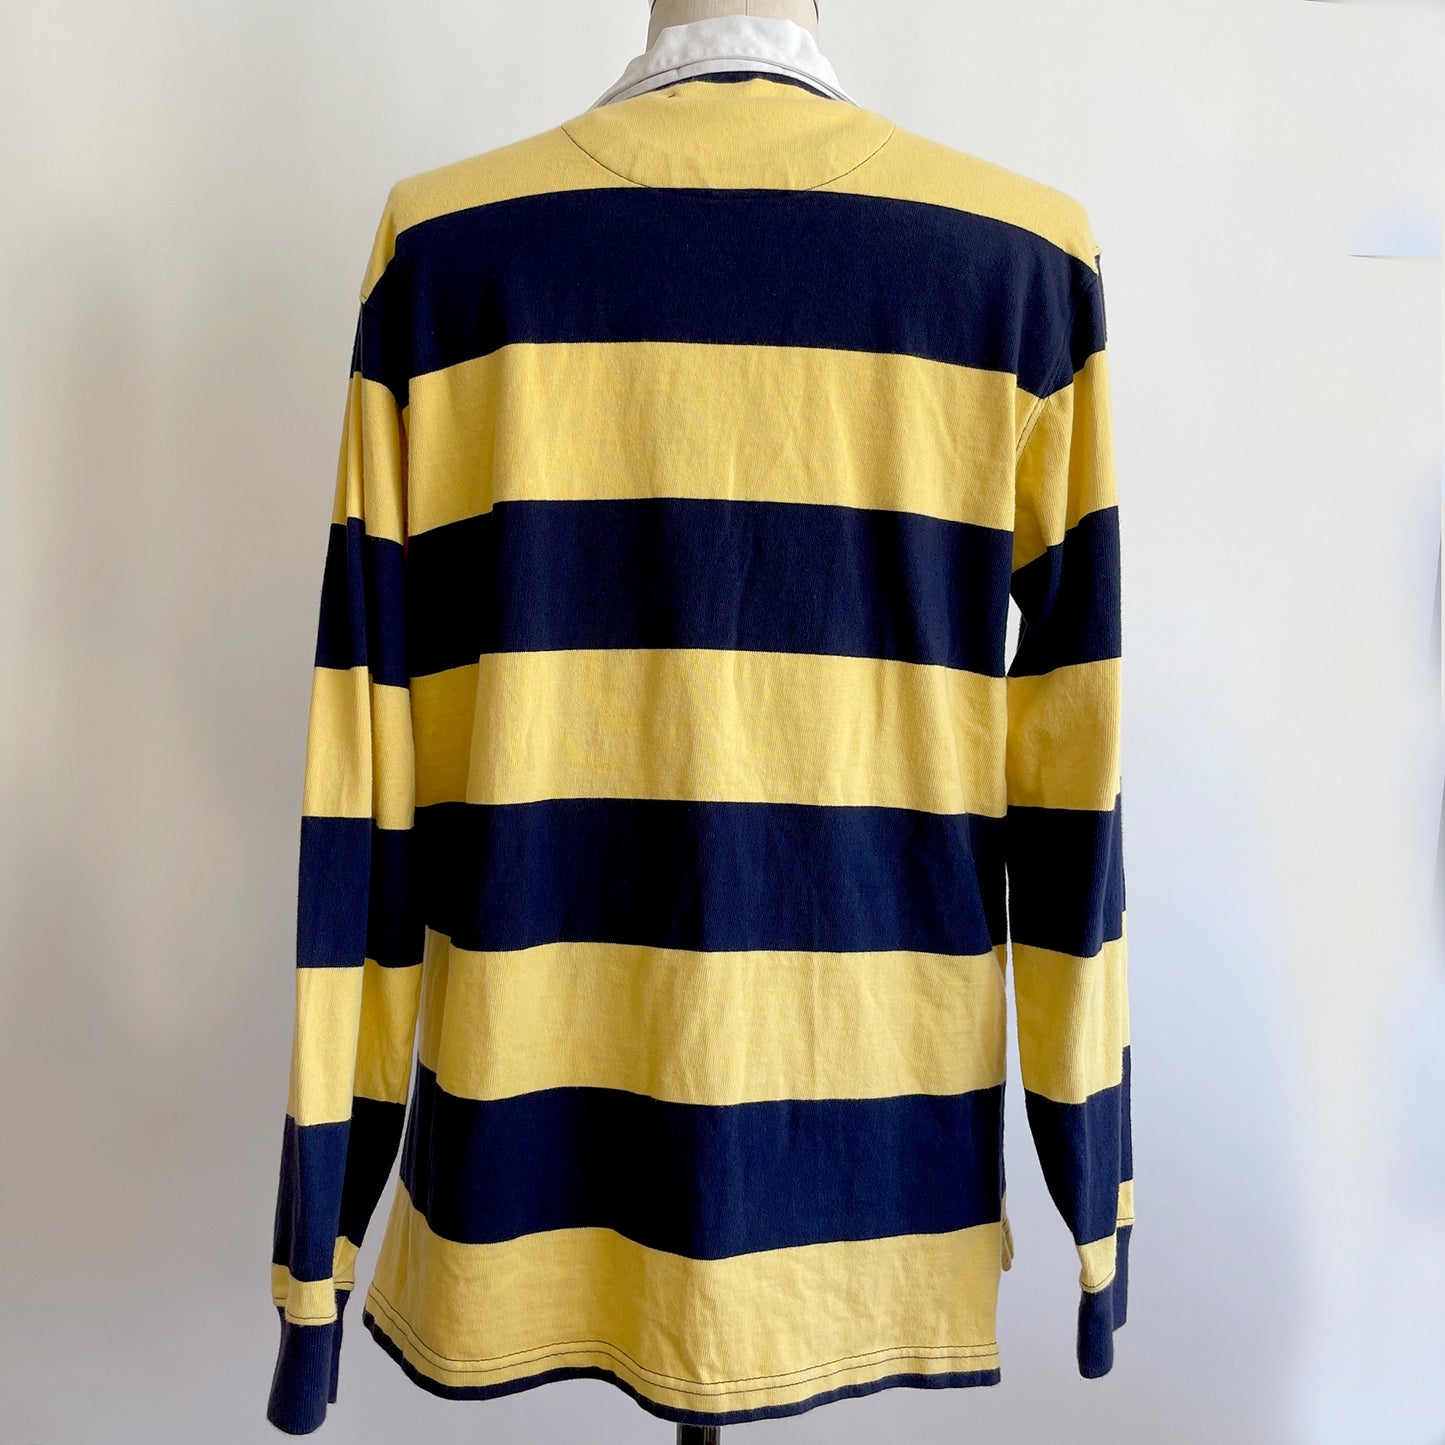 Vintage Navy and Gold Rugby shirt